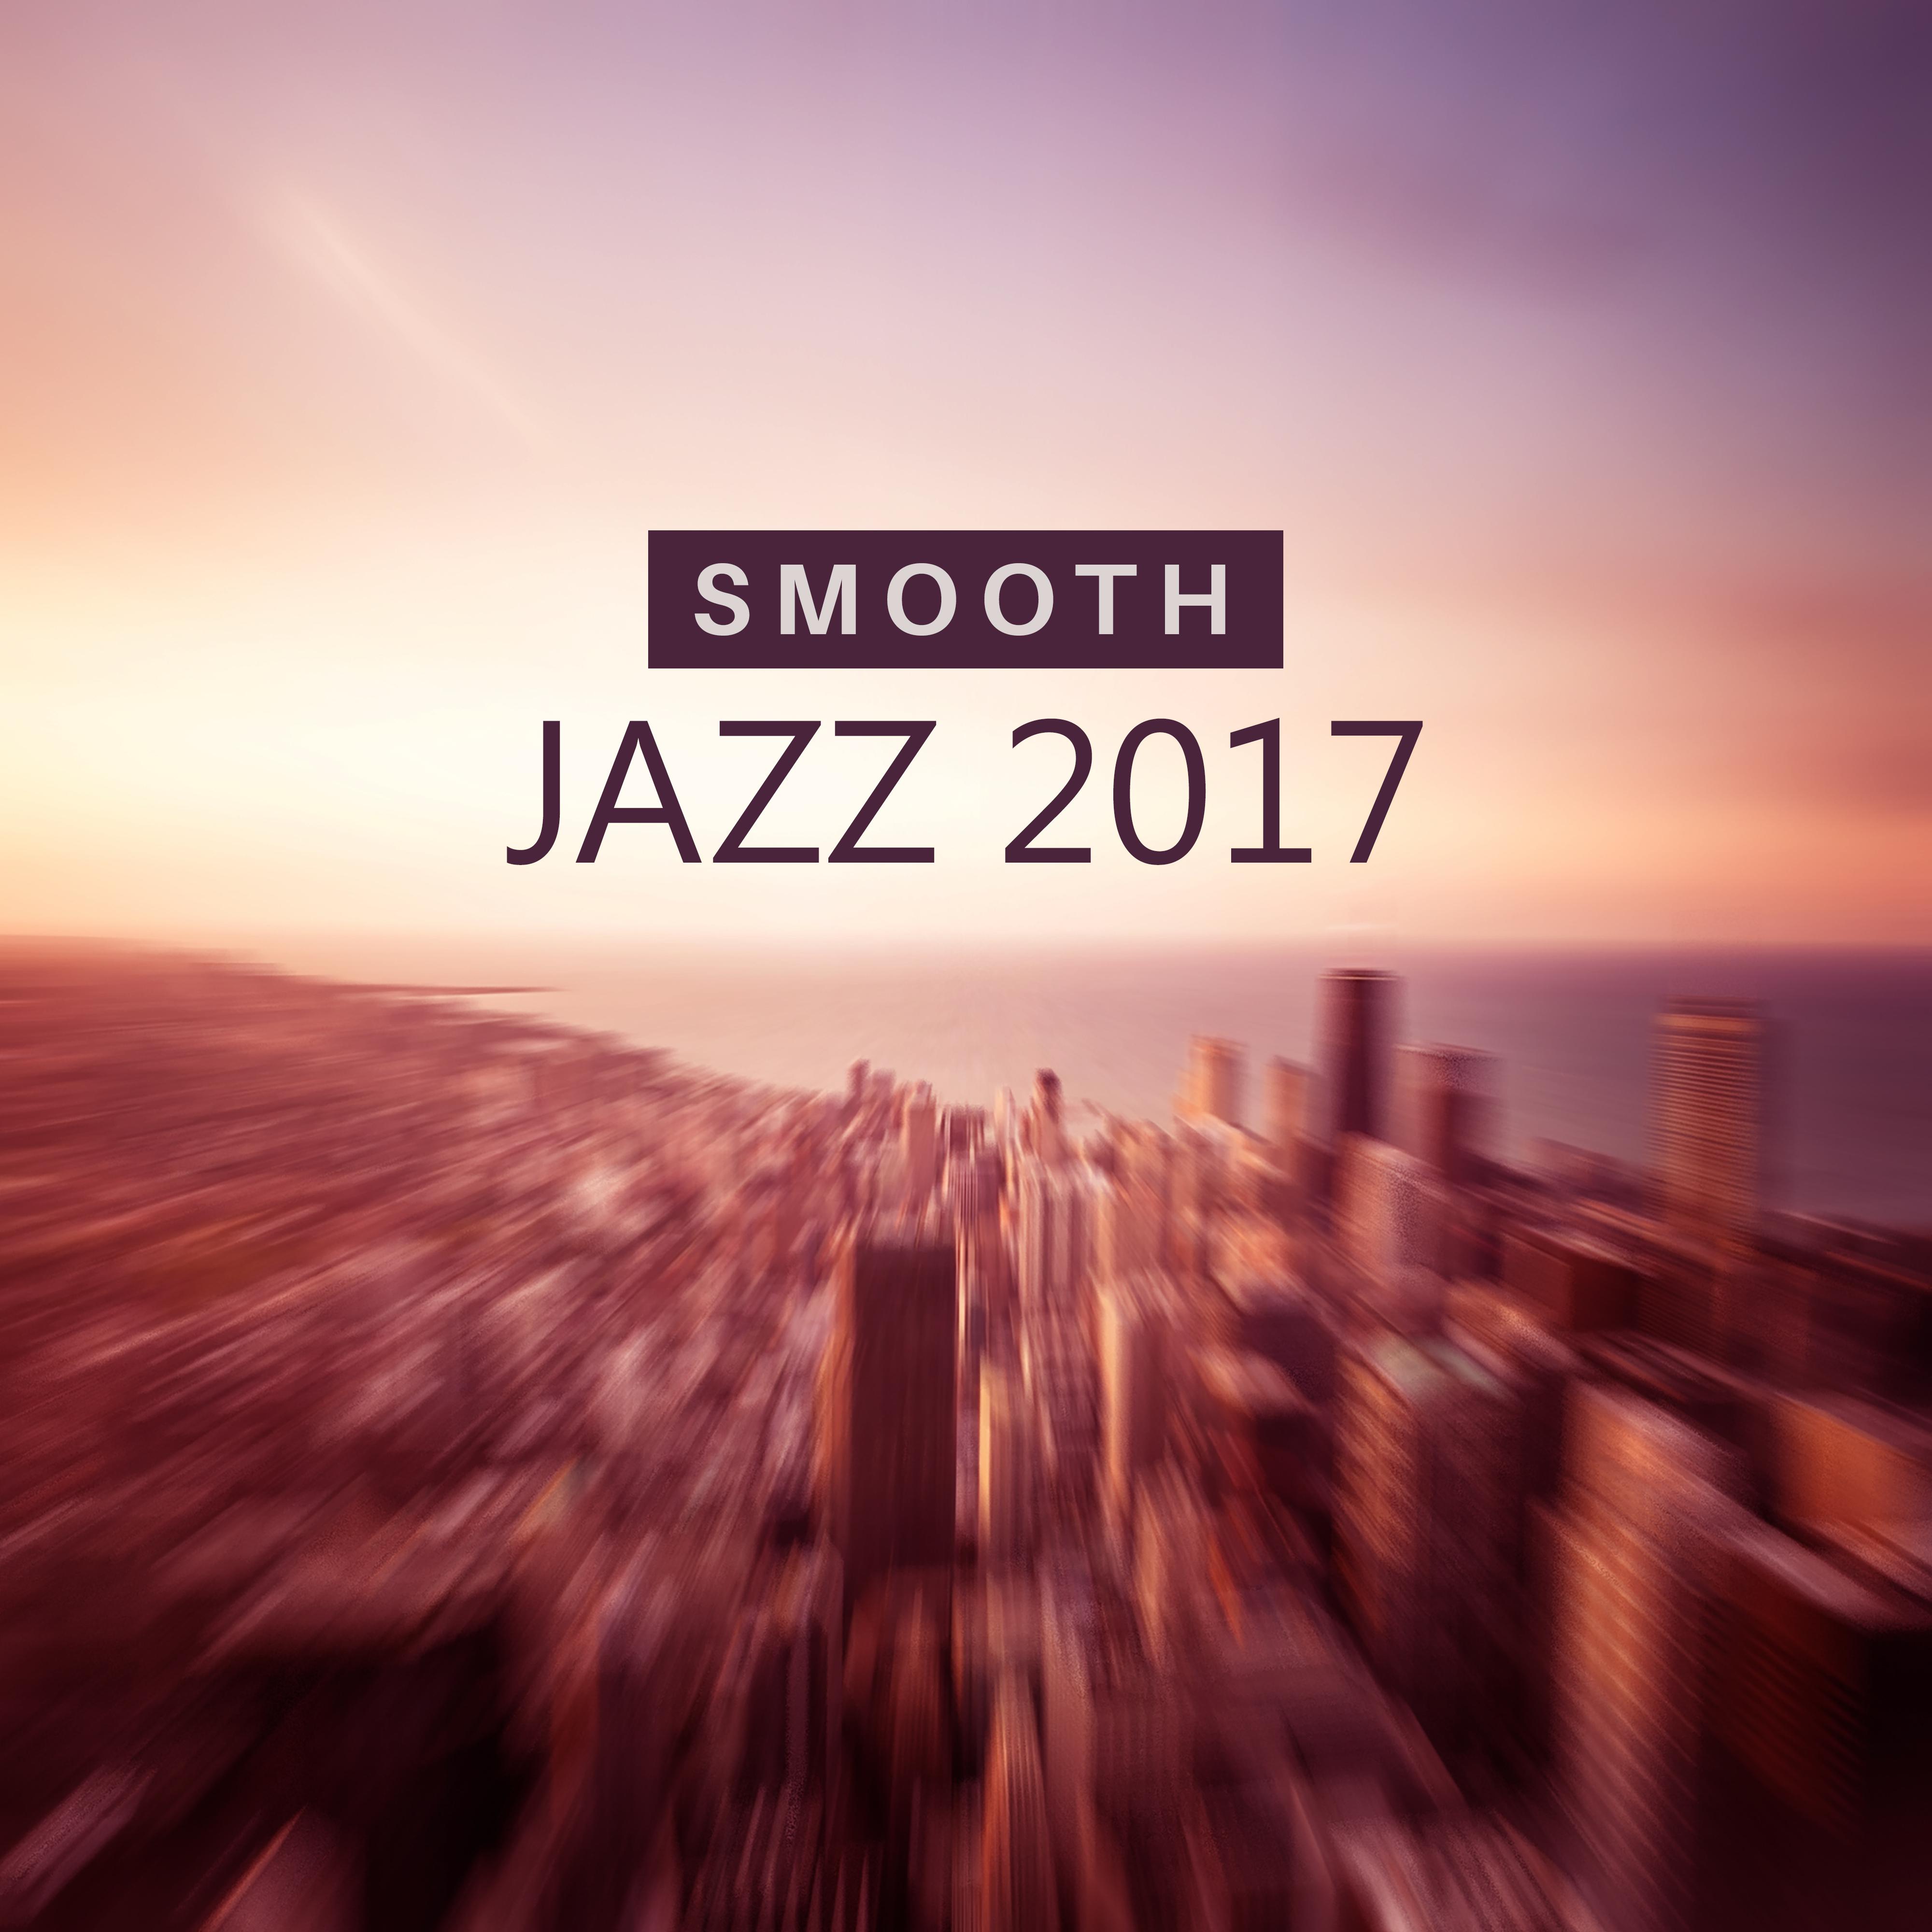 Smooth Jazz 2017  Easy Listening Piano Bar, Mellow Jazz, Smooth Sounds, Best Background Music